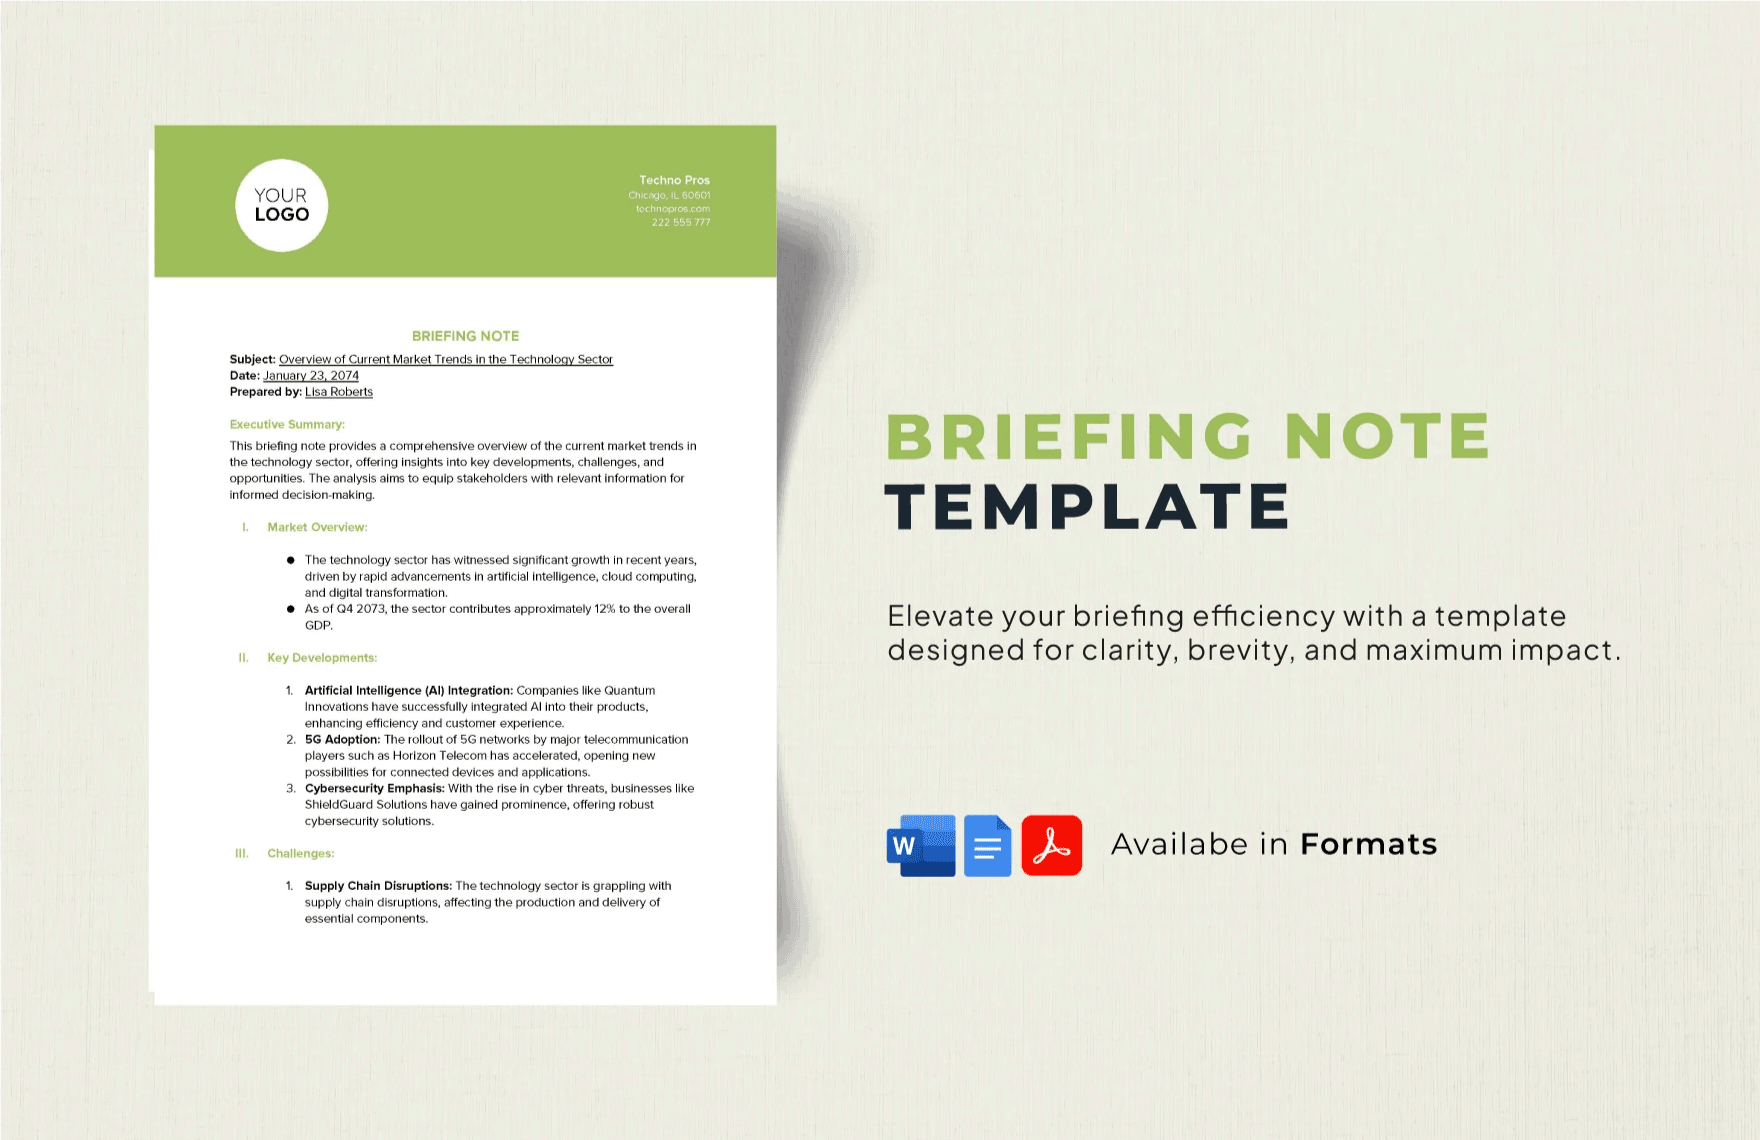 Briefing Note Template